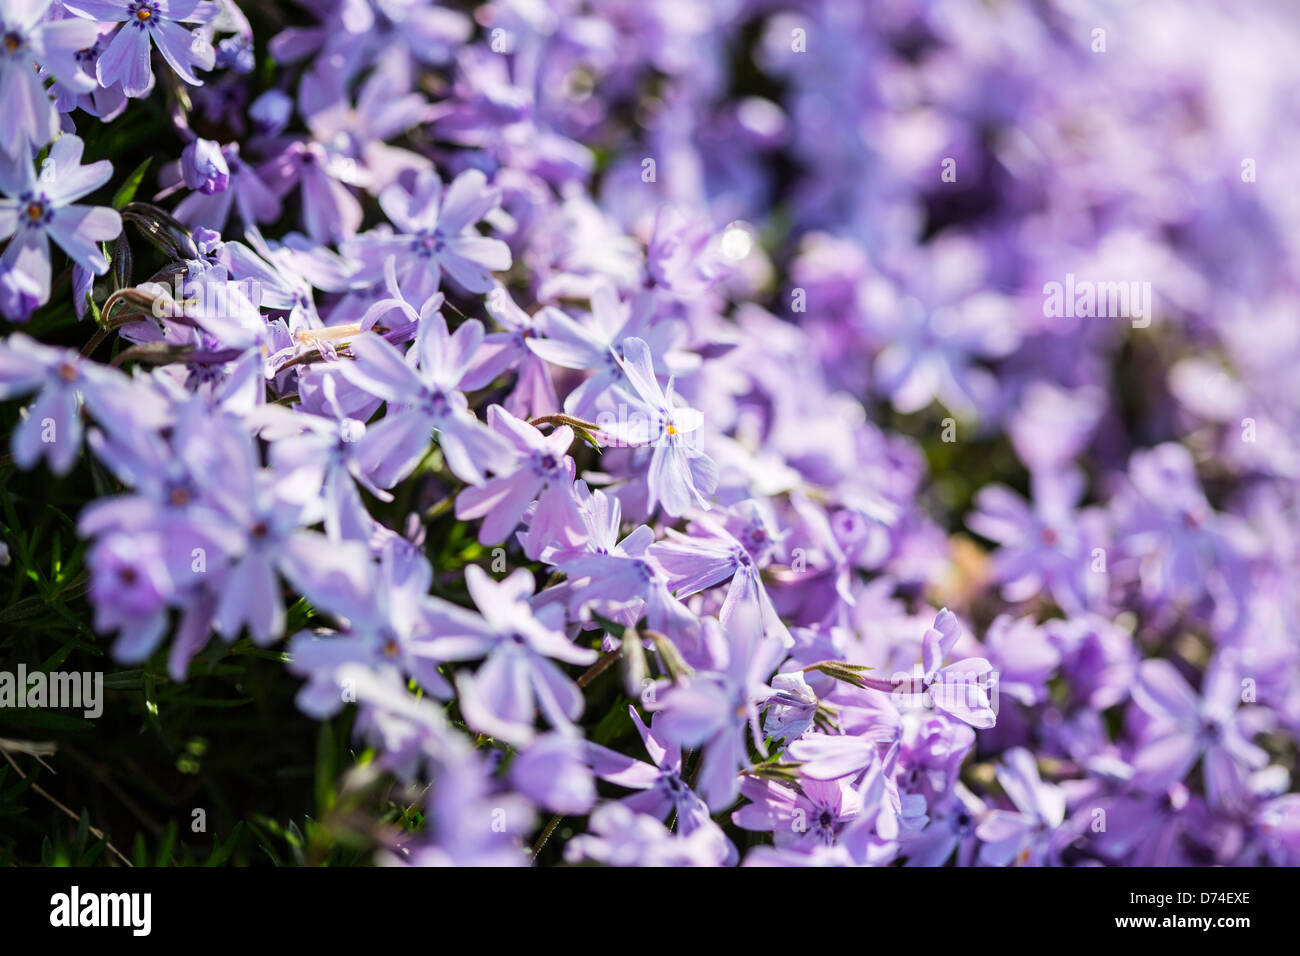 A close up shot of a patch of purple phlox marks the start of spring in the Carolinas. Stock Photo